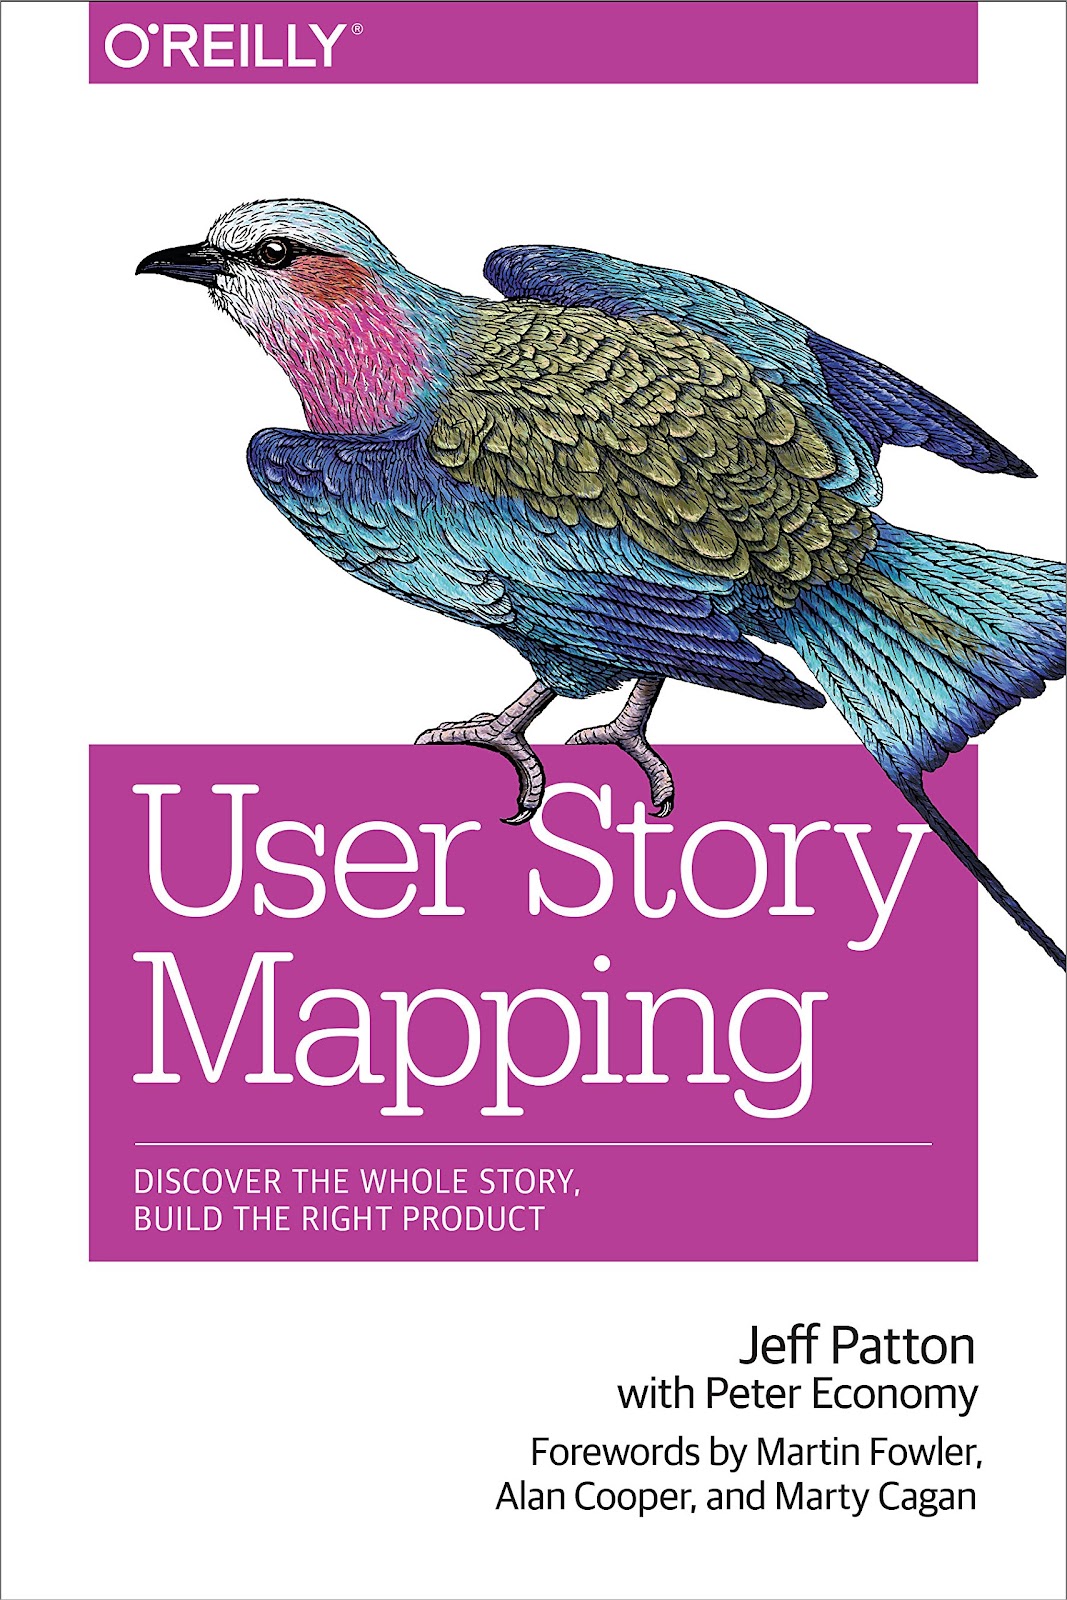 PDF Ebook - User Story Mapping: Discover the Whole Story, Build the Right Product